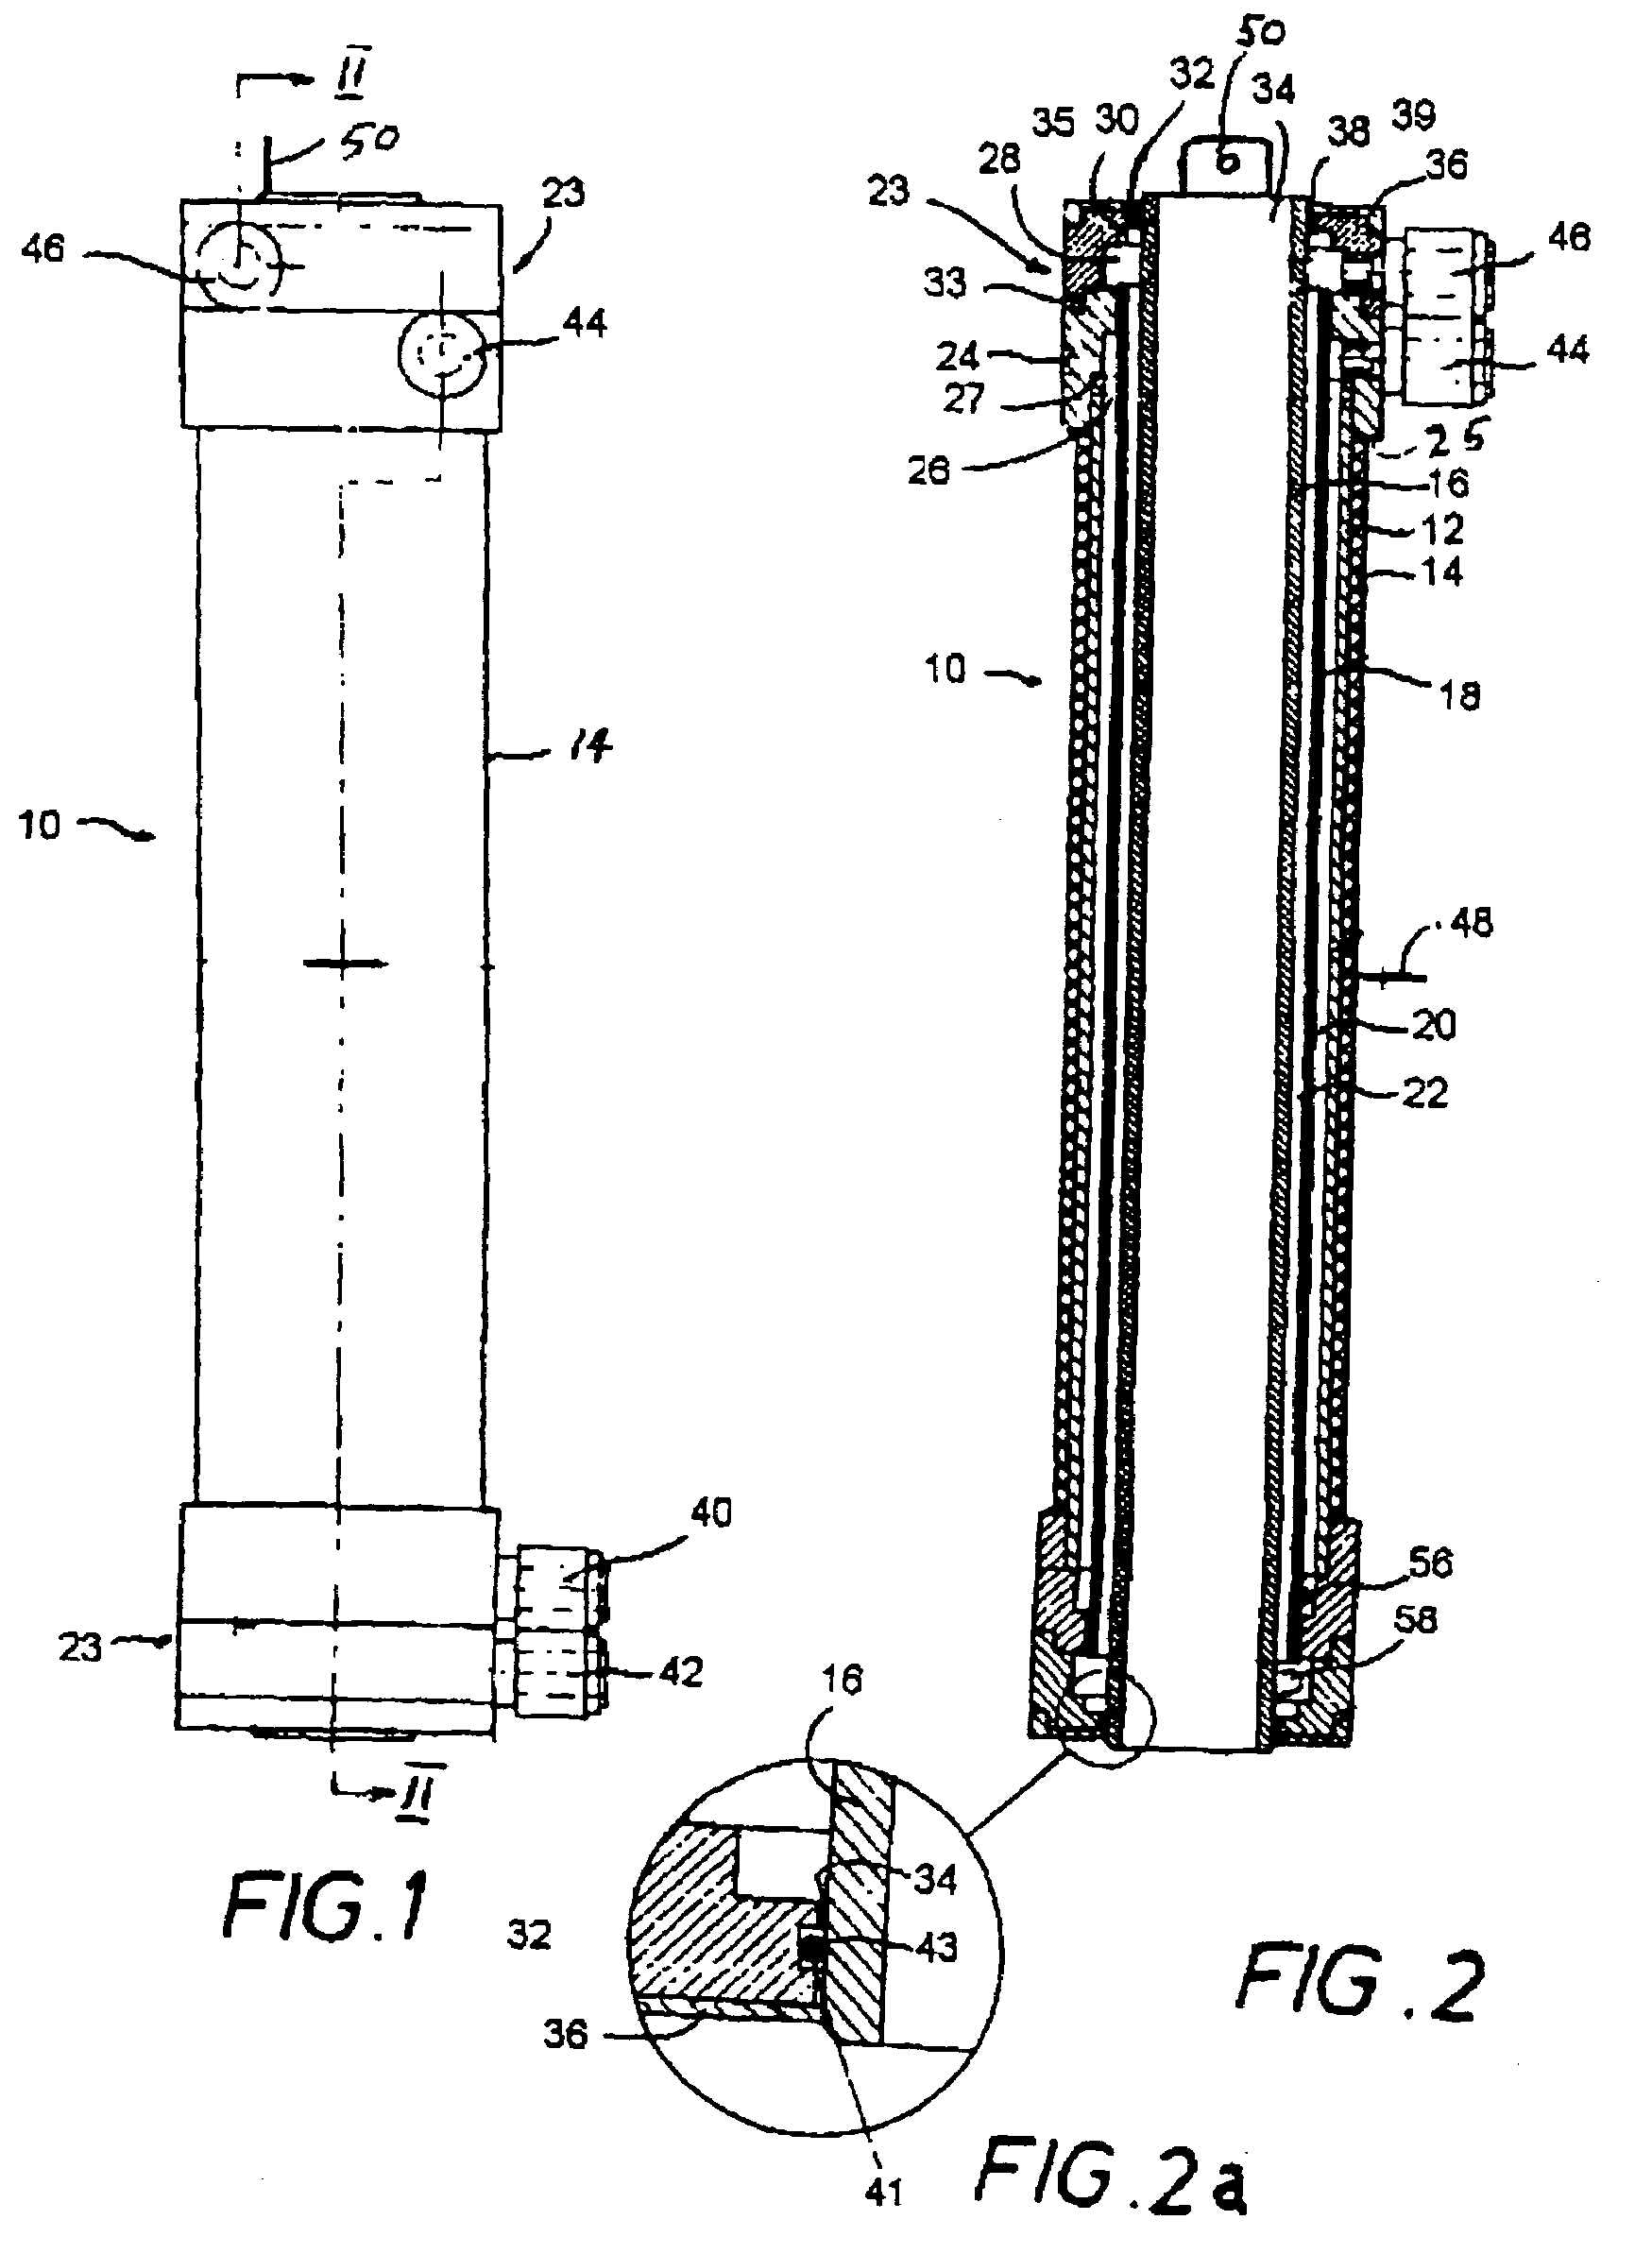 Method and apparatus for making electrolyzed water